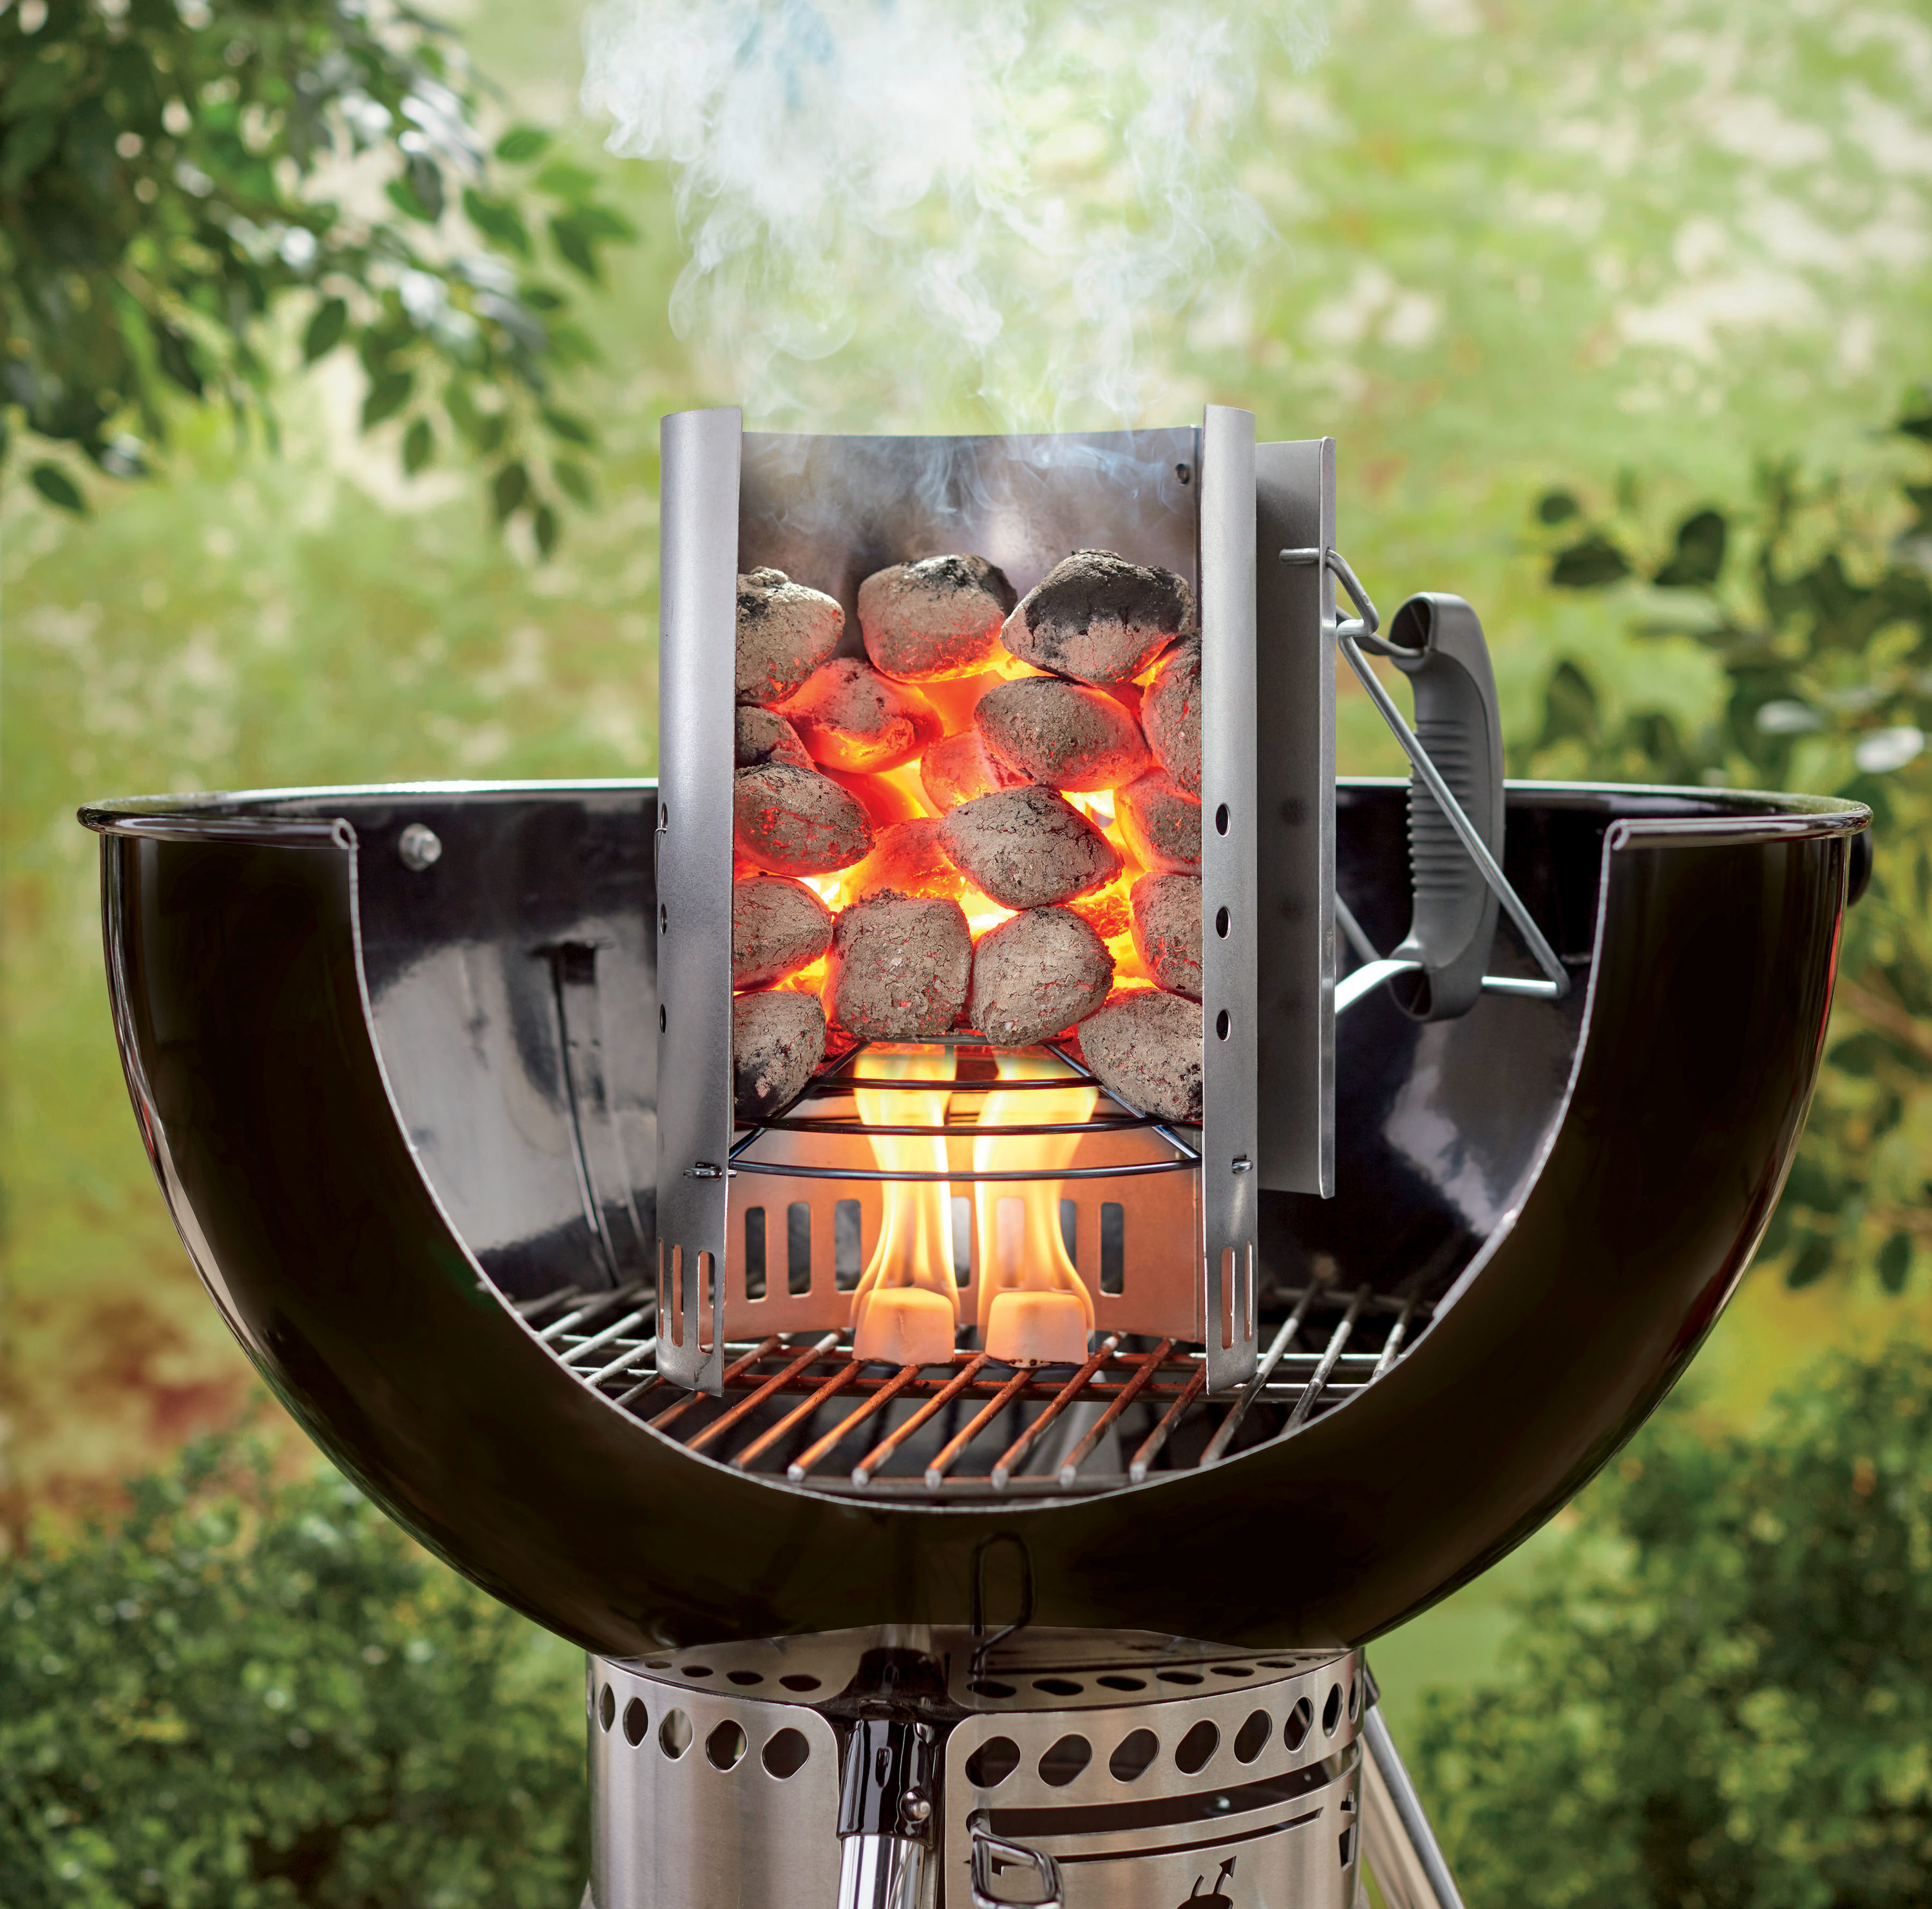 Weber Chimney Charcoal department at Lowes.com